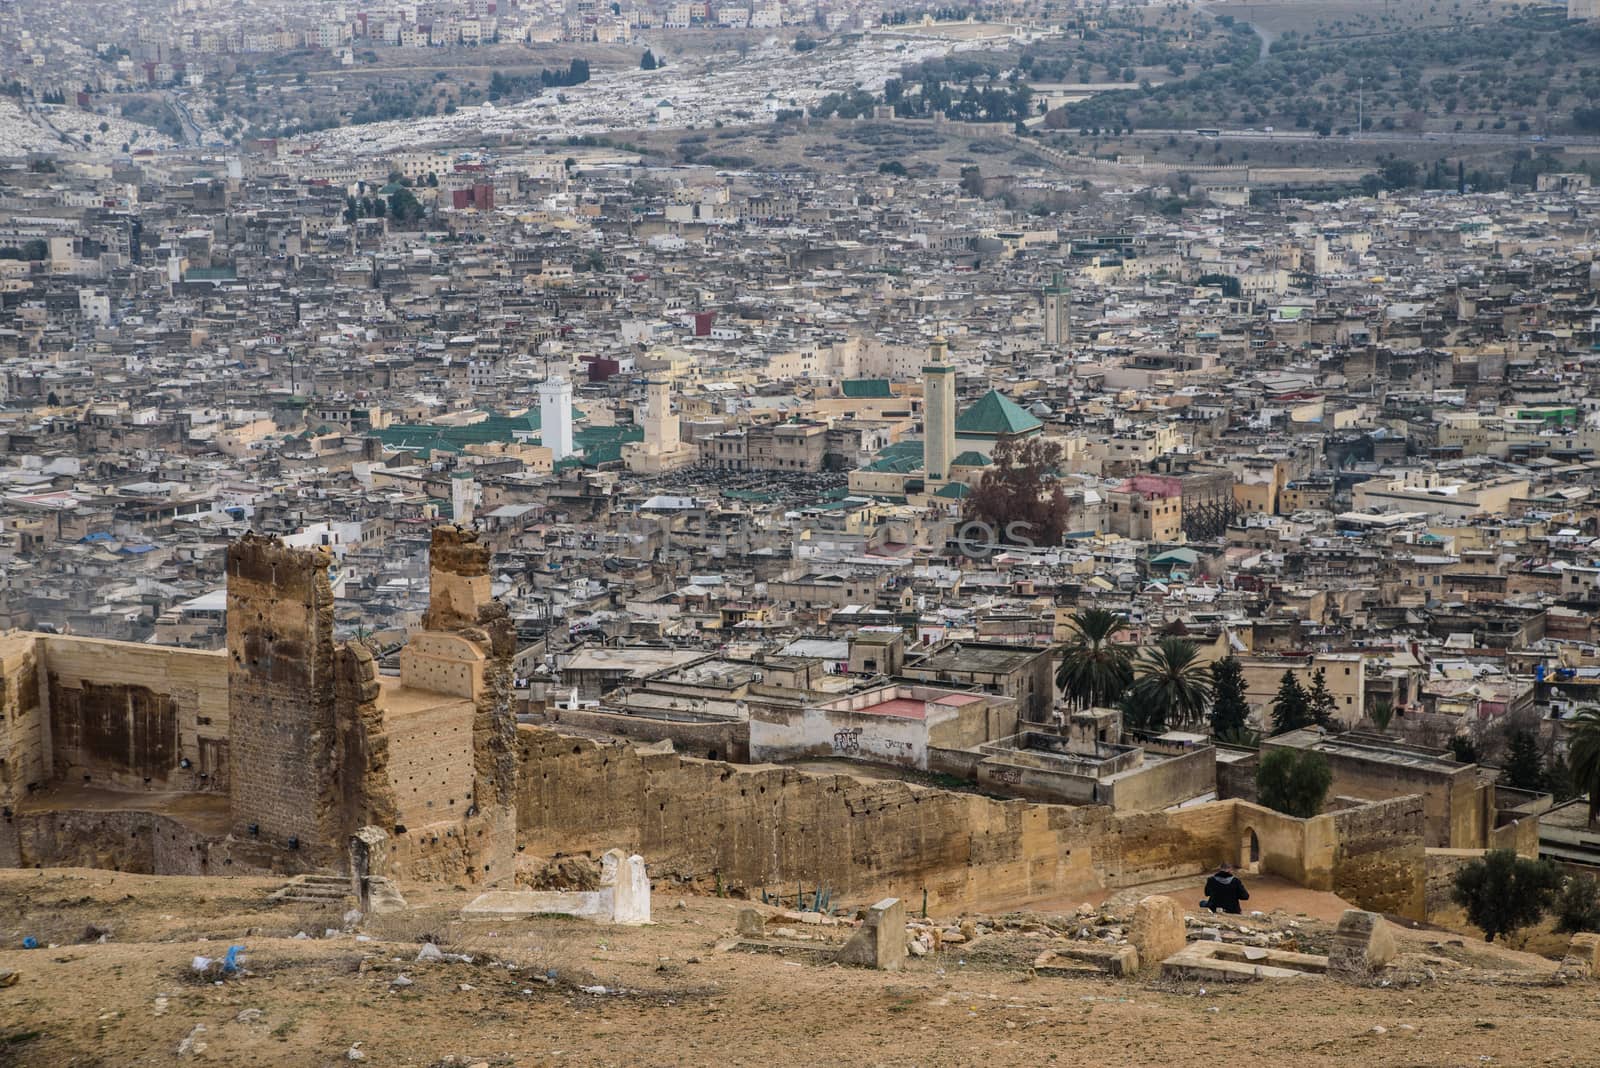 View of the old town of Fez, Morocco, North Africa